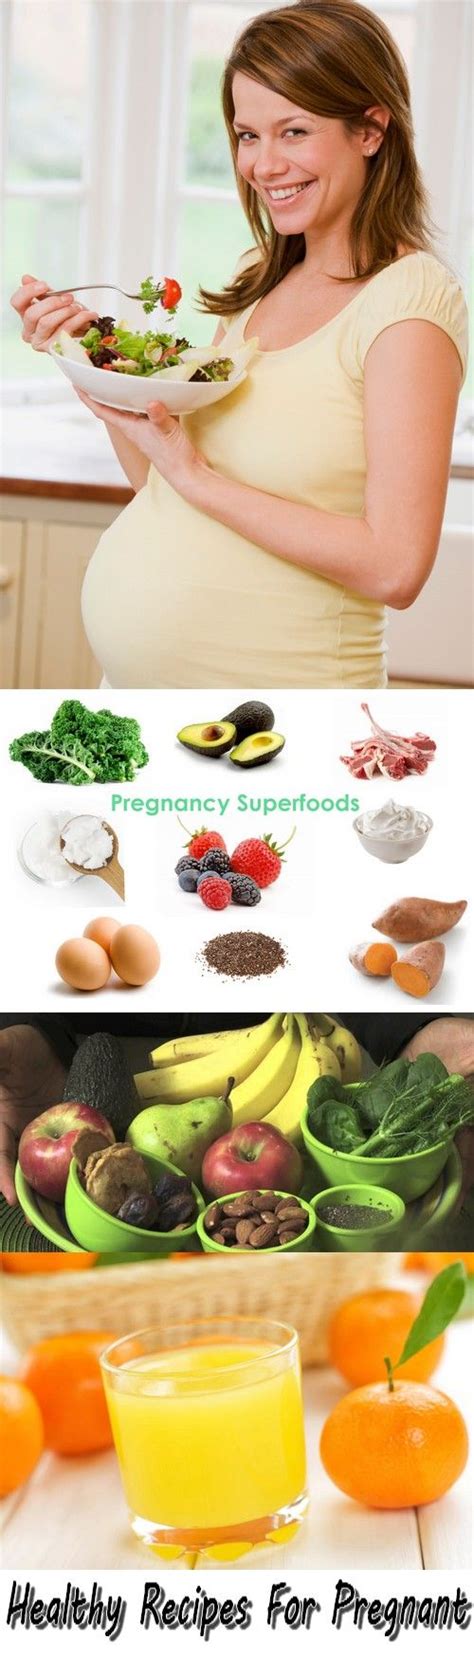 8 healthy yet satisfying pregnancy treats. 2 Healthy Recipes For Pregnant Women (With images) | Food ...